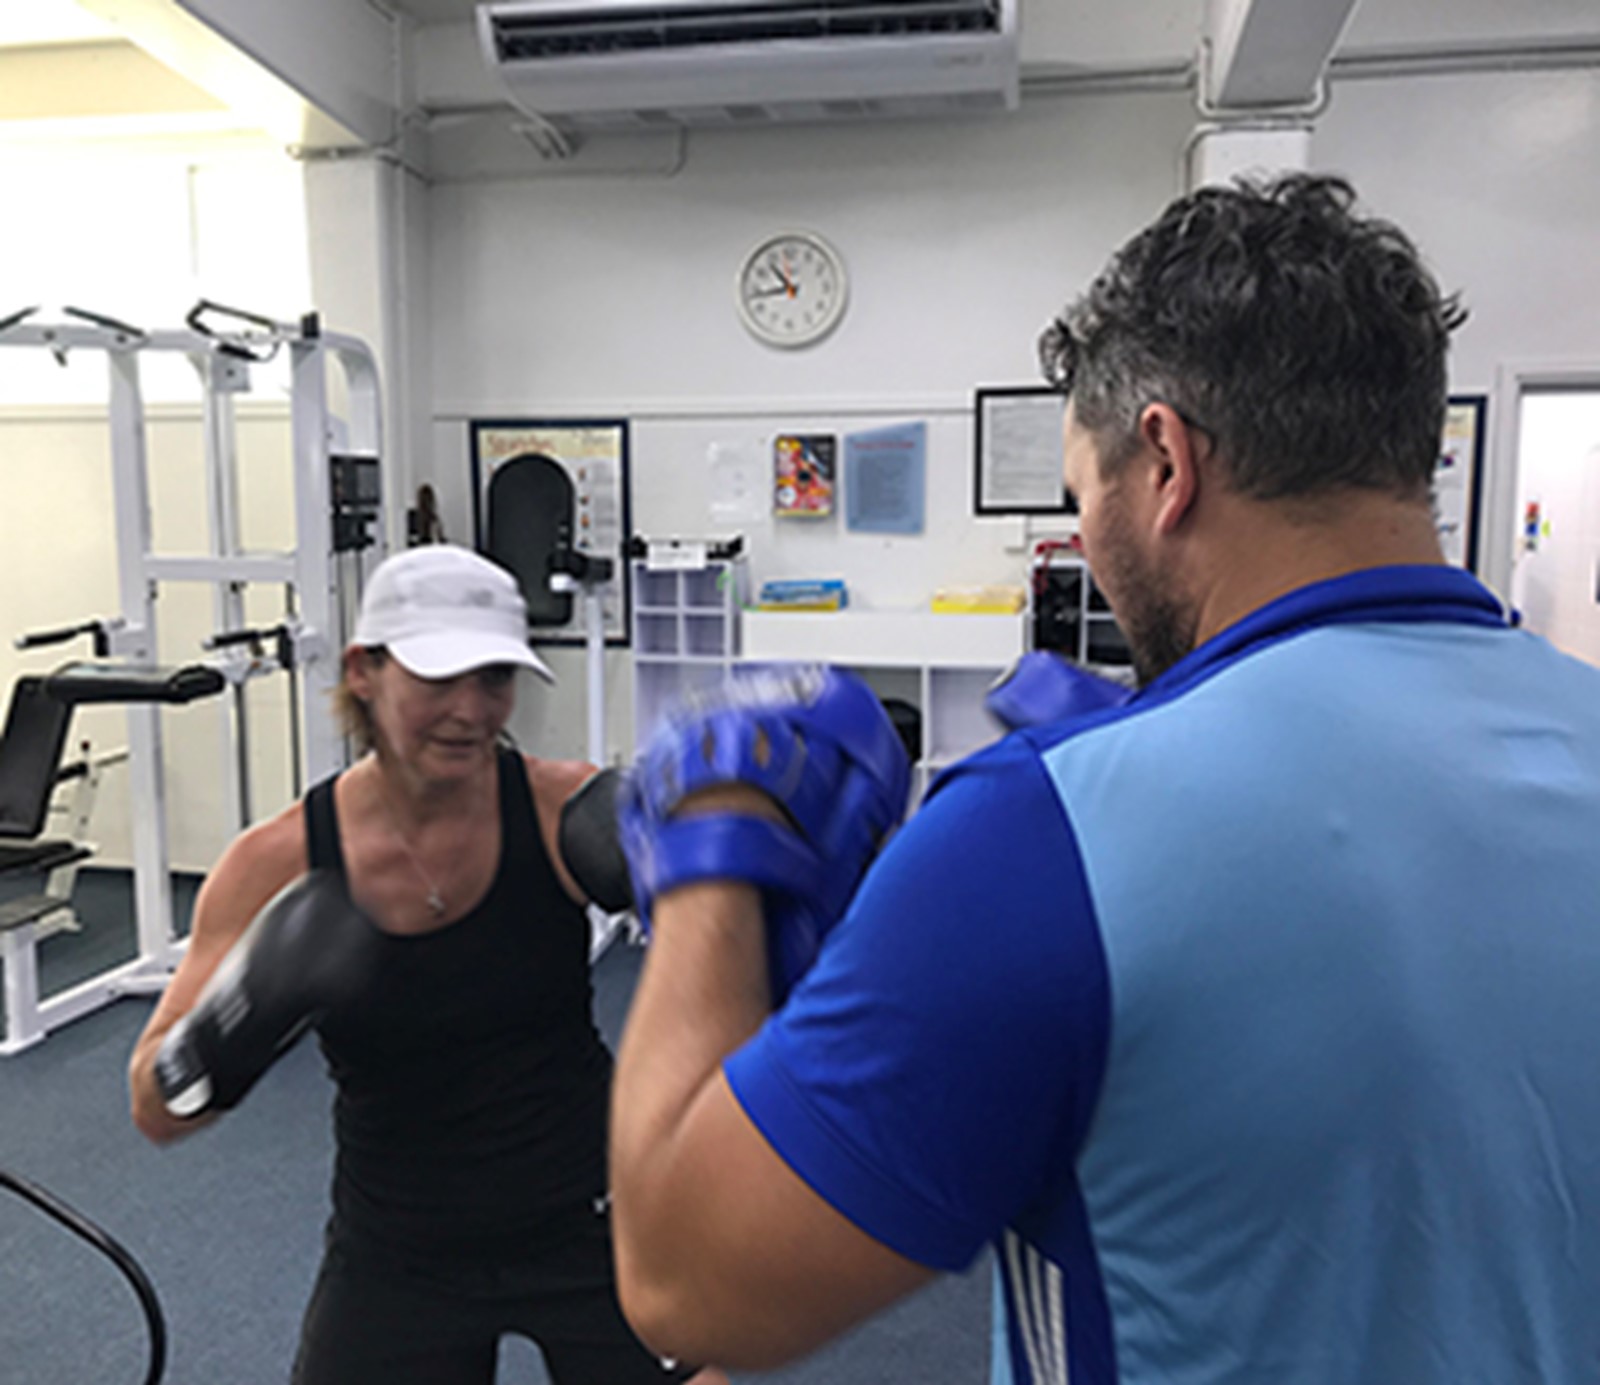 Trainer and woman boxing 